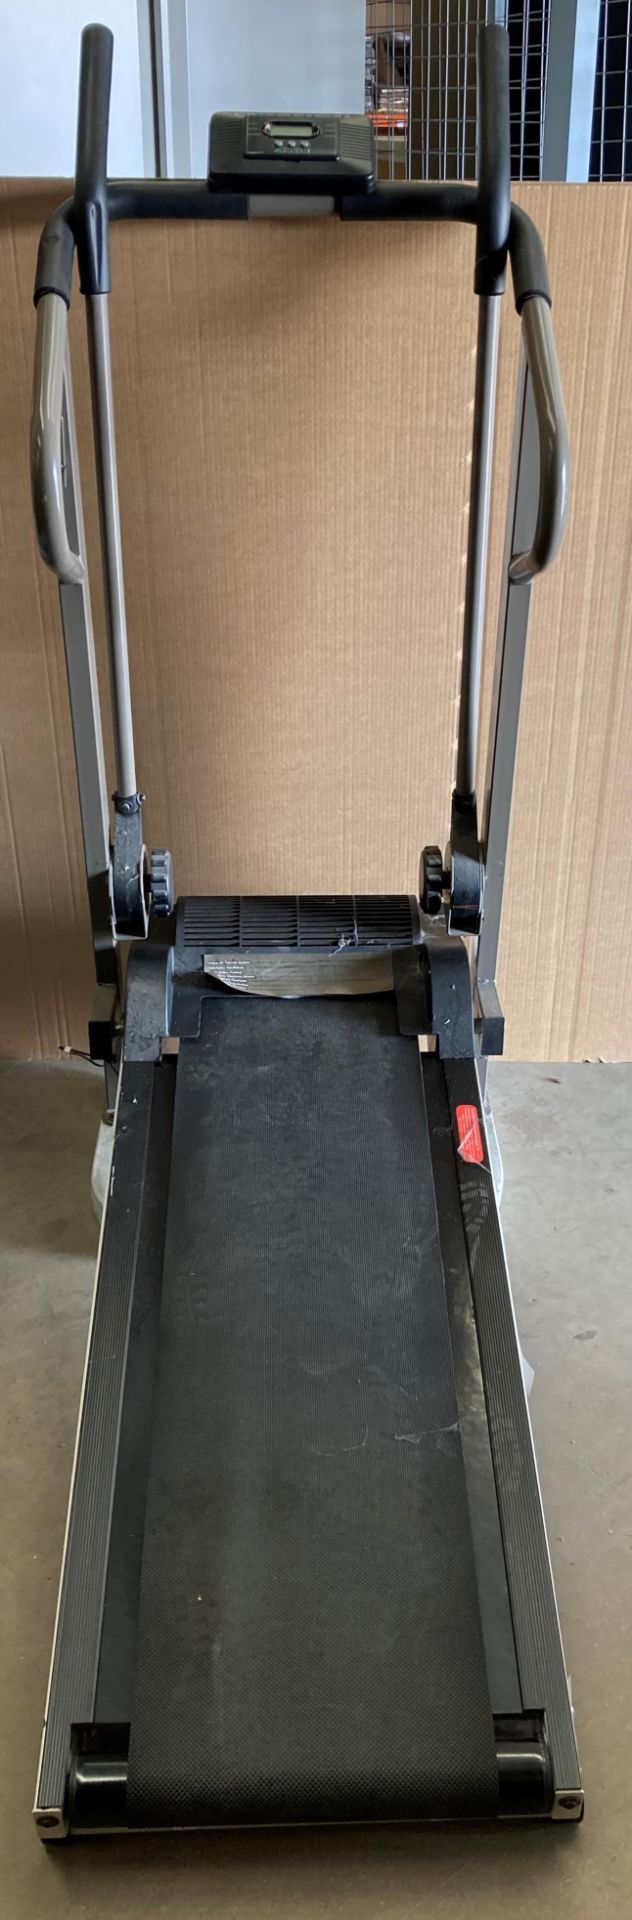 Air Trac Dual-Action Air Resistance treadmill with digital readout (no batteries)